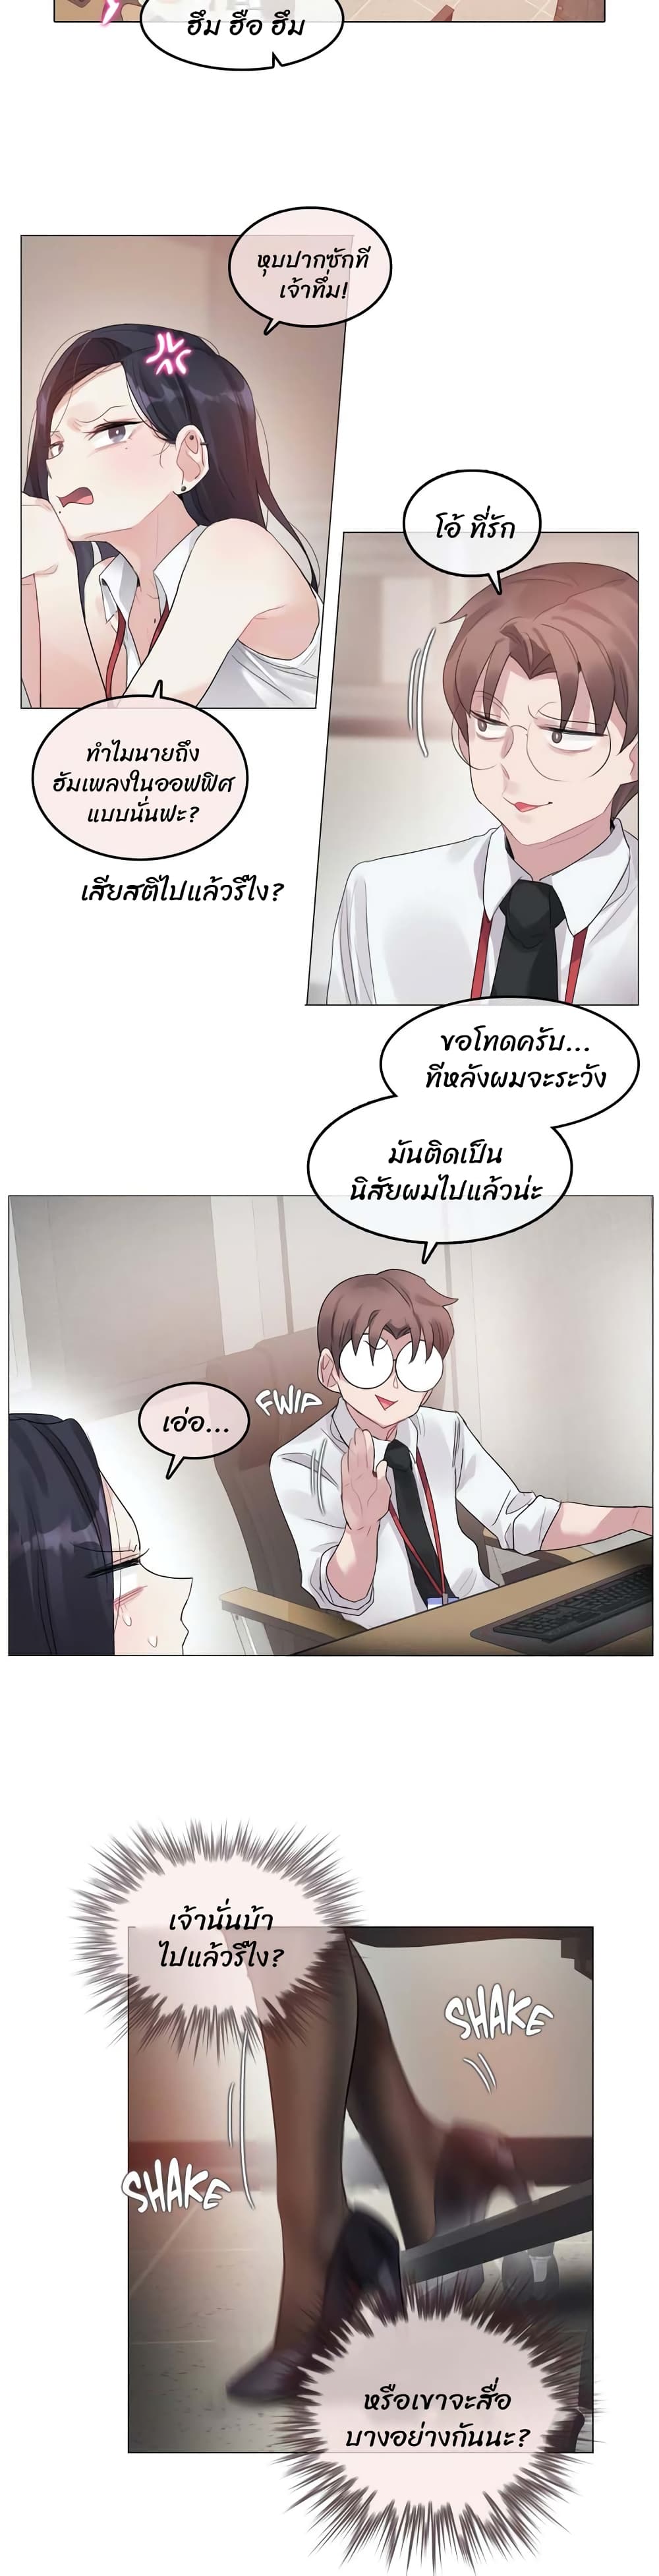 A Pervert's Daily Life 96 (6)